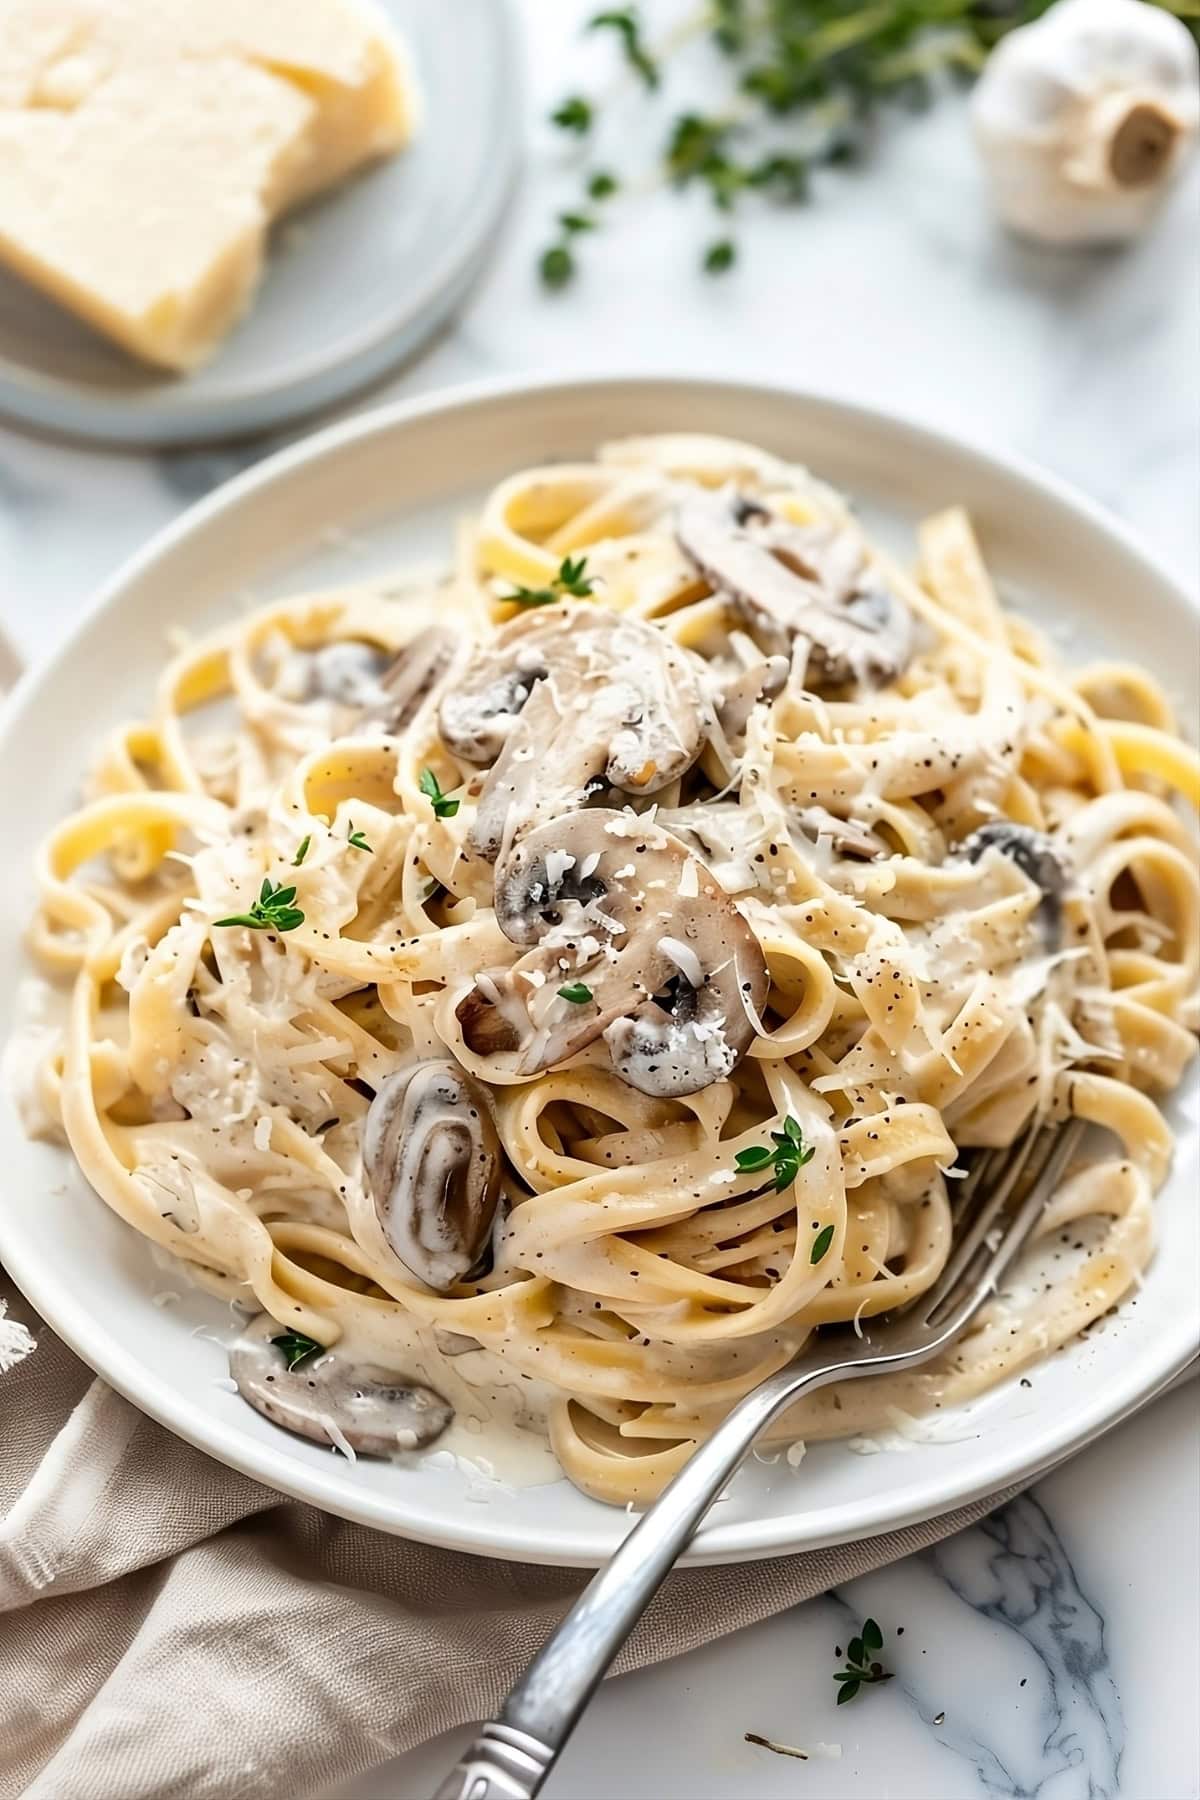 Mushroom pasta in creamy sauce garnished with parmesan cheese served in a white plate.